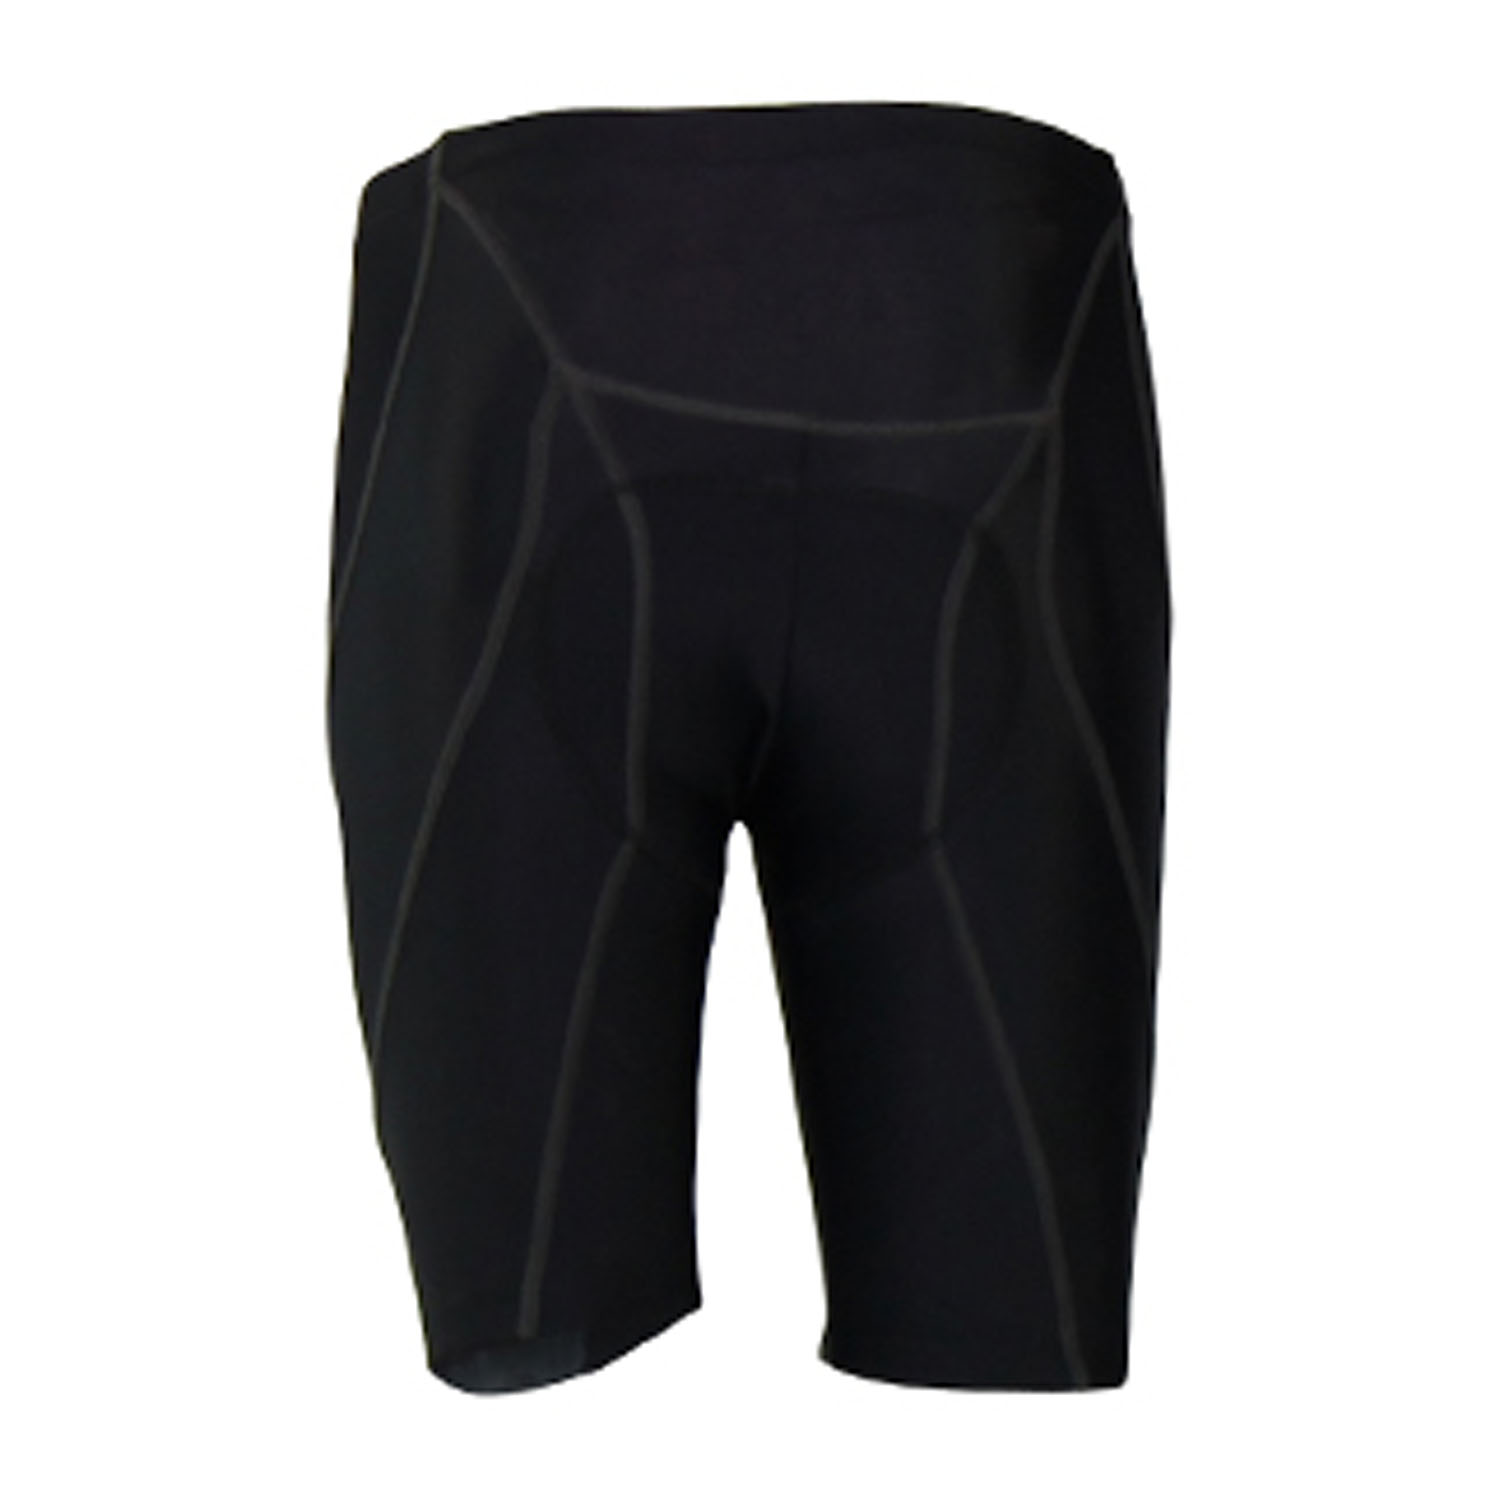 Male Cycle Shorts Regular Black with Black – O2Fit